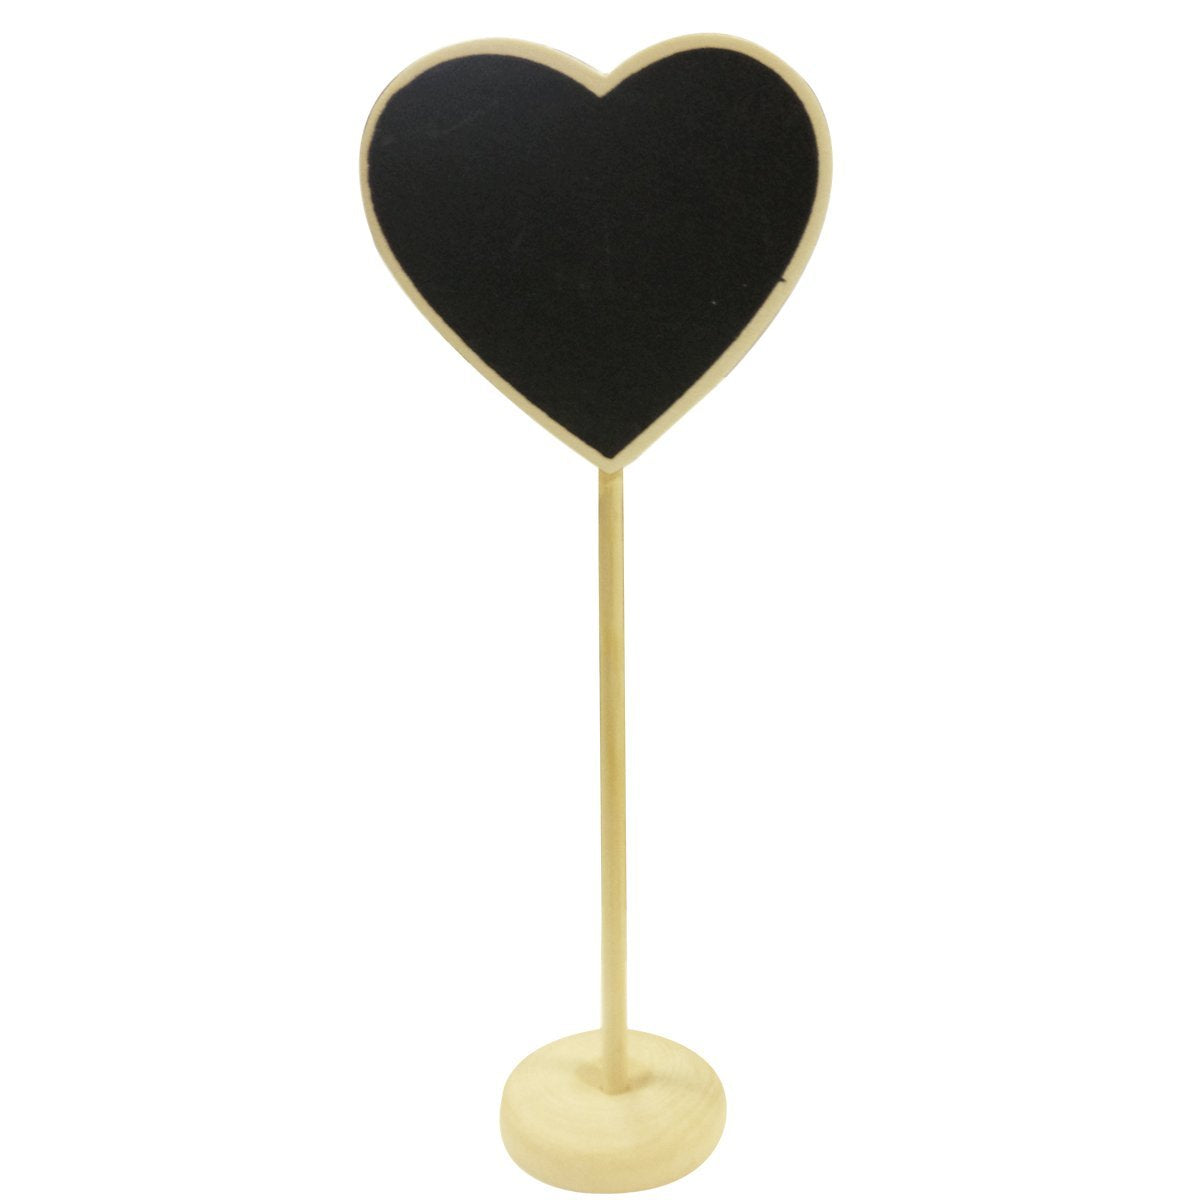 Set of 8 Chalkboard Stands With Chalkboard Stickers, 3" x 2.25" Heart